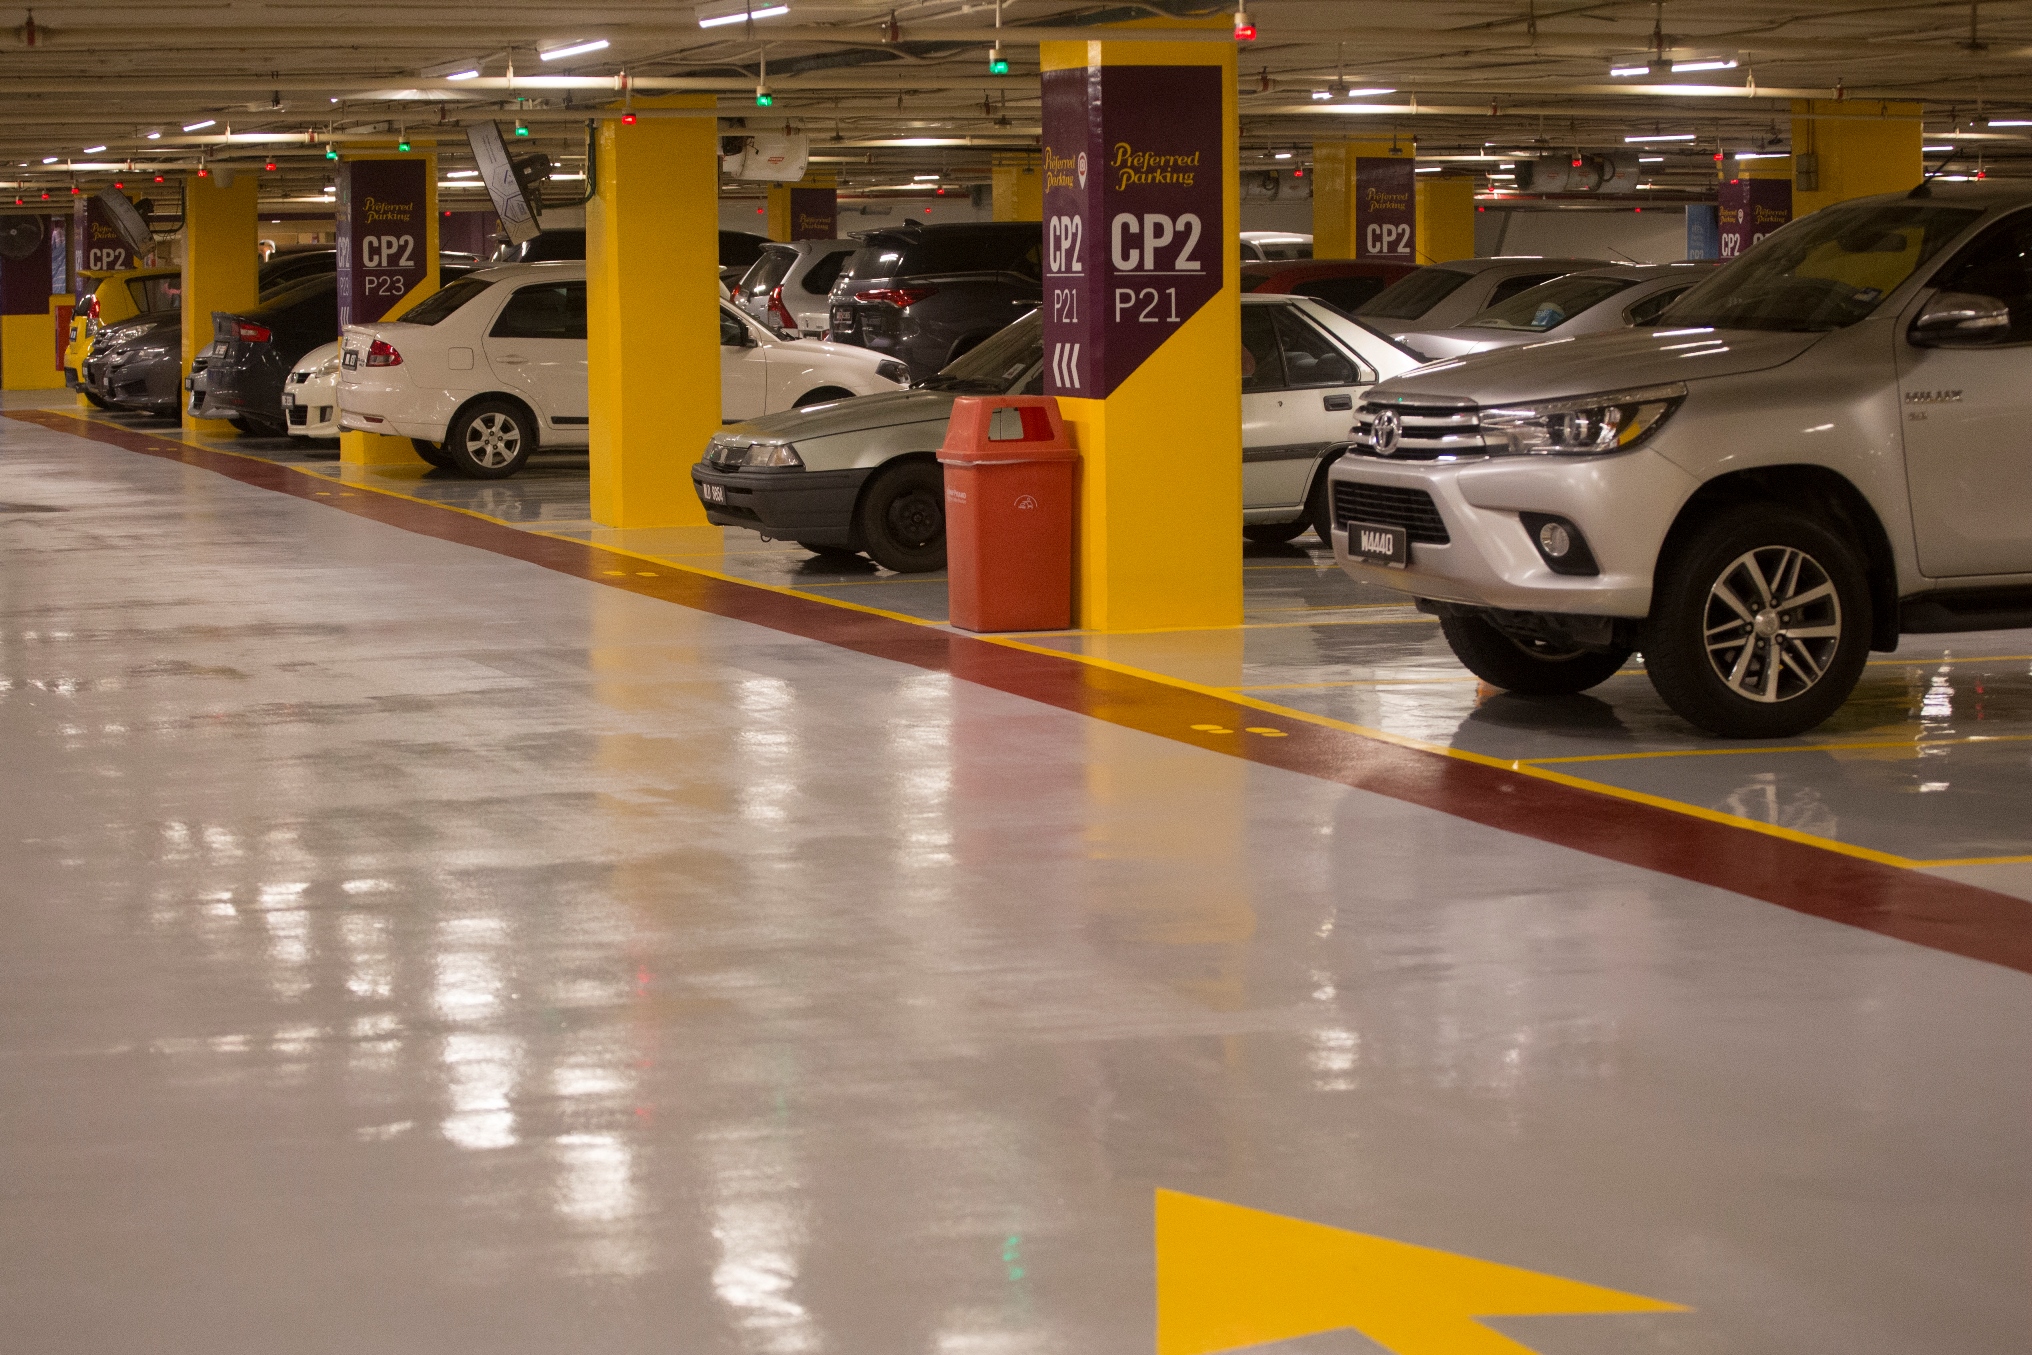 Epoxy Flooring, Polished Machine Concrete What’s the Differences?